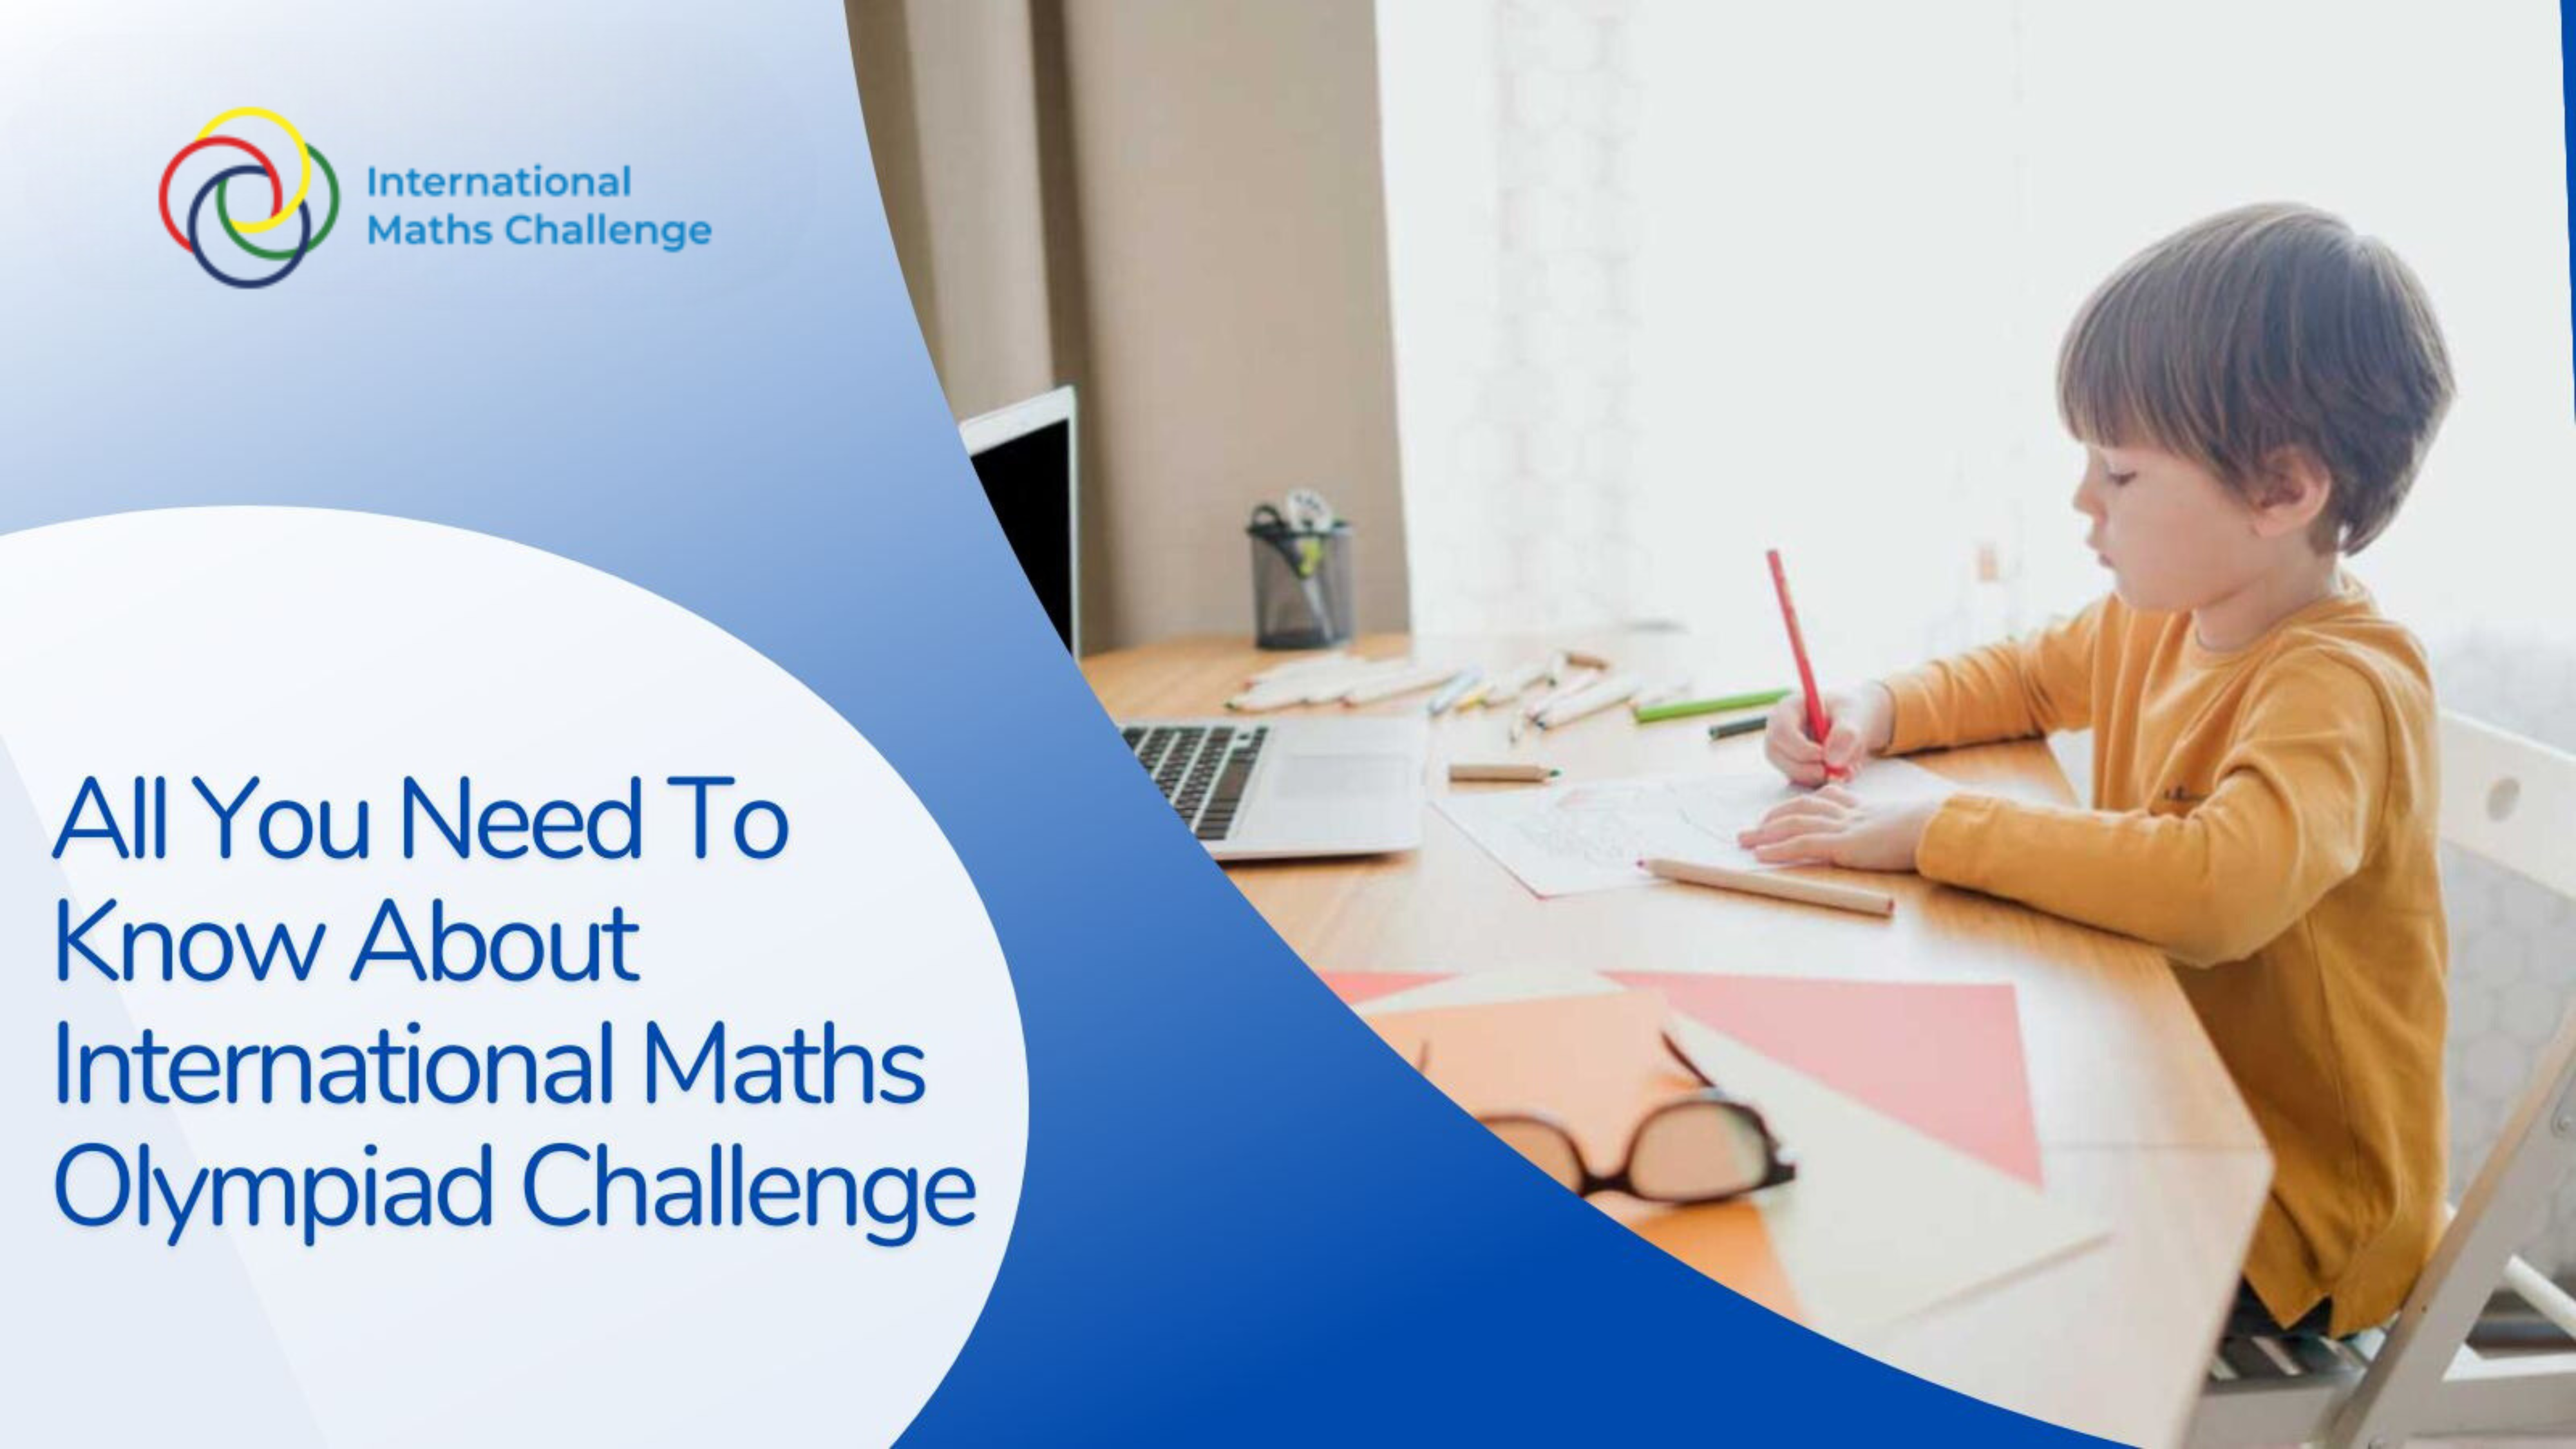 All You Need To Know About International Maths Olympiad Challenge